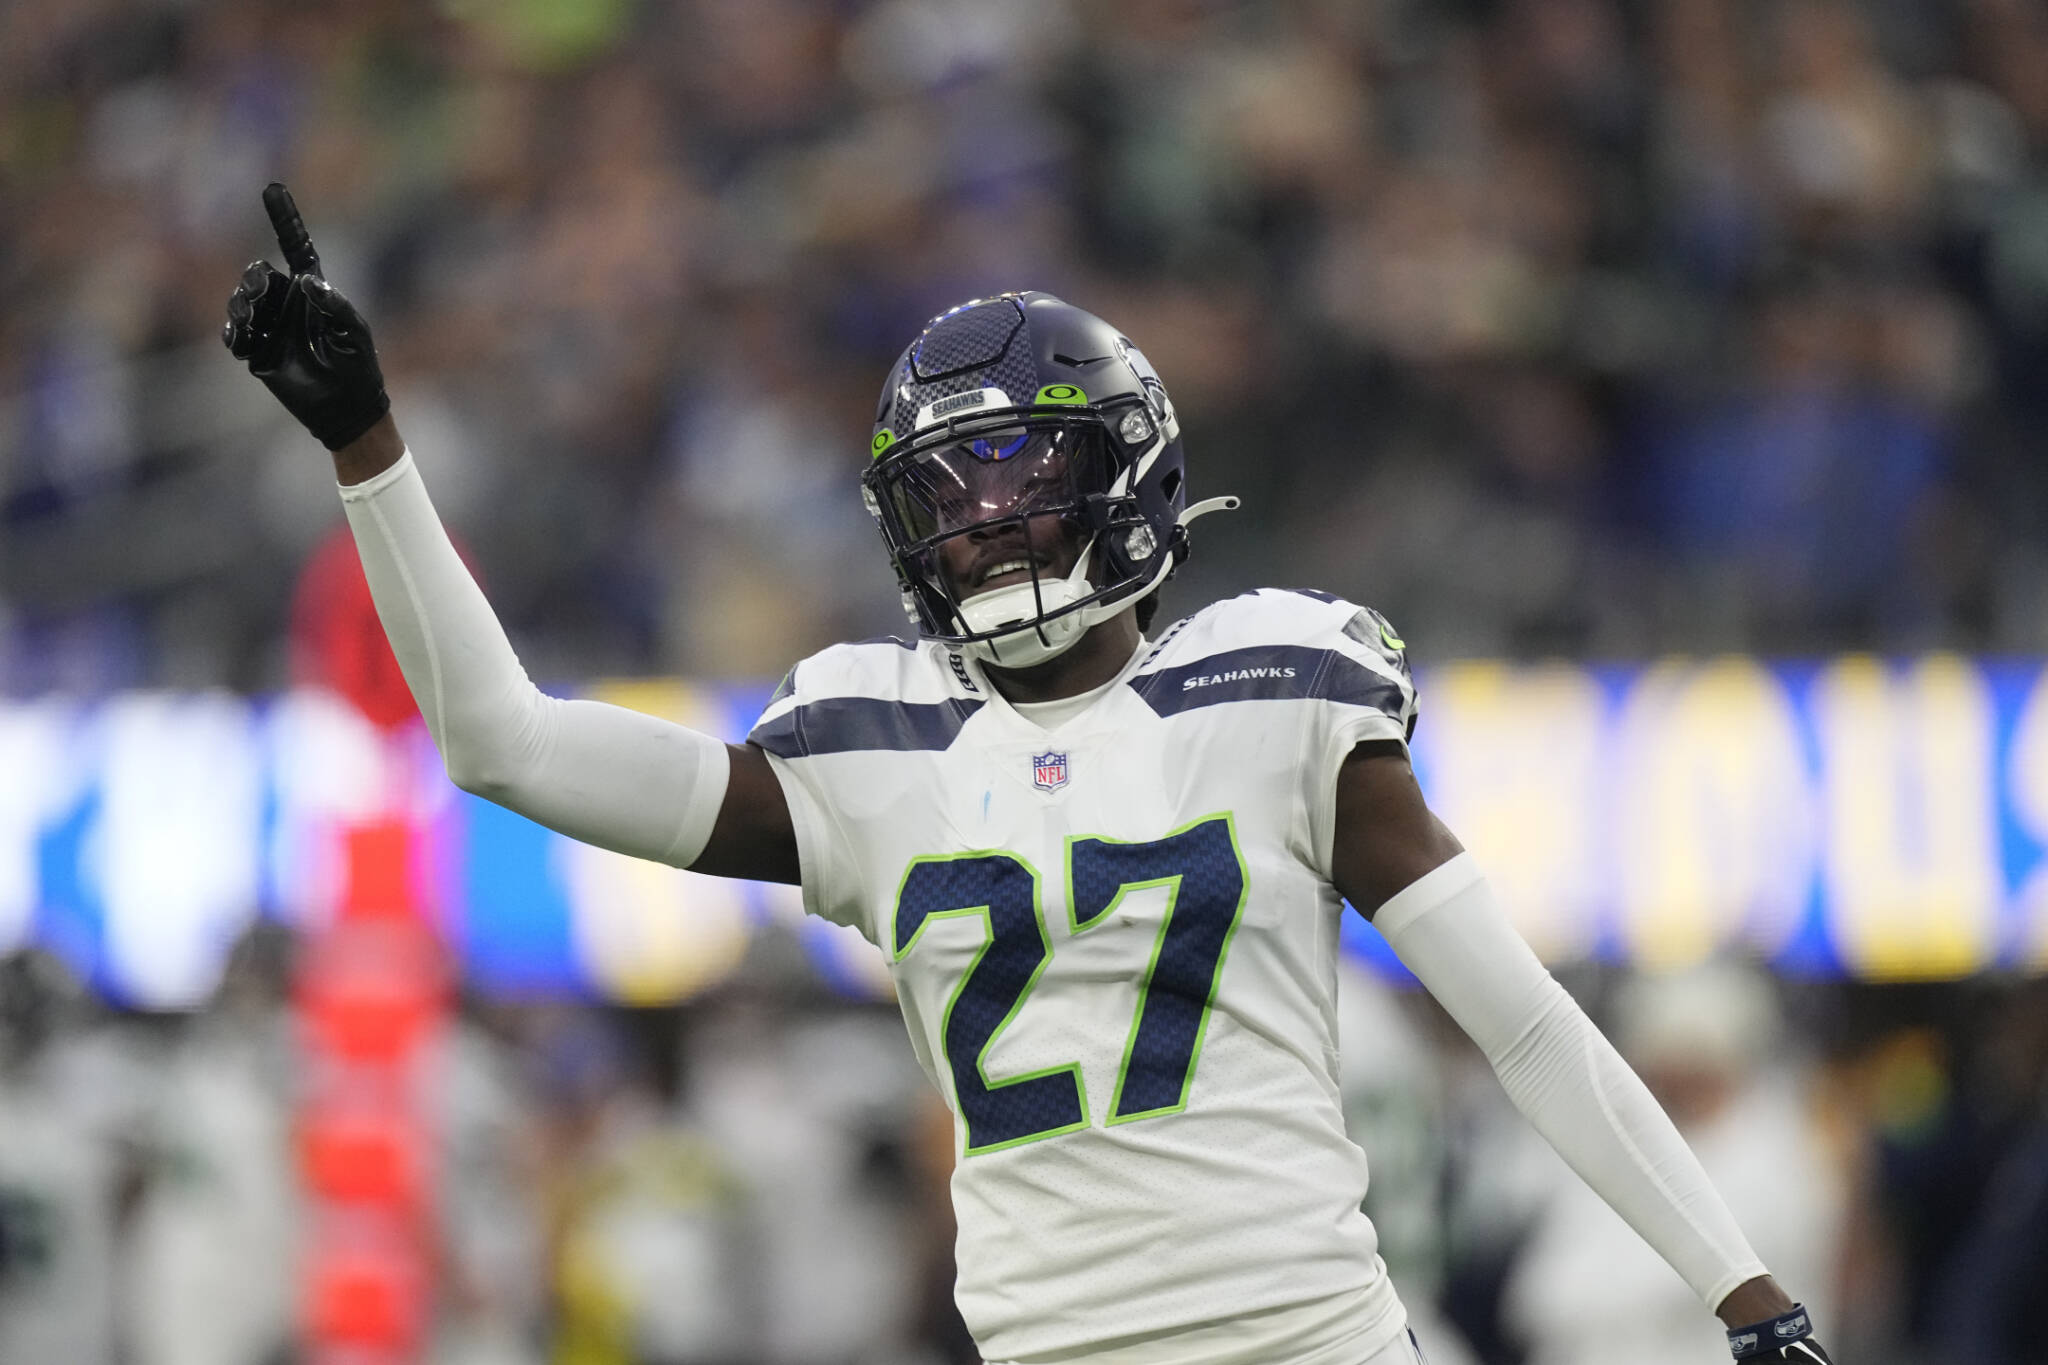 Smith, Woolen among 4 Seahawks elected to Pro Bowl